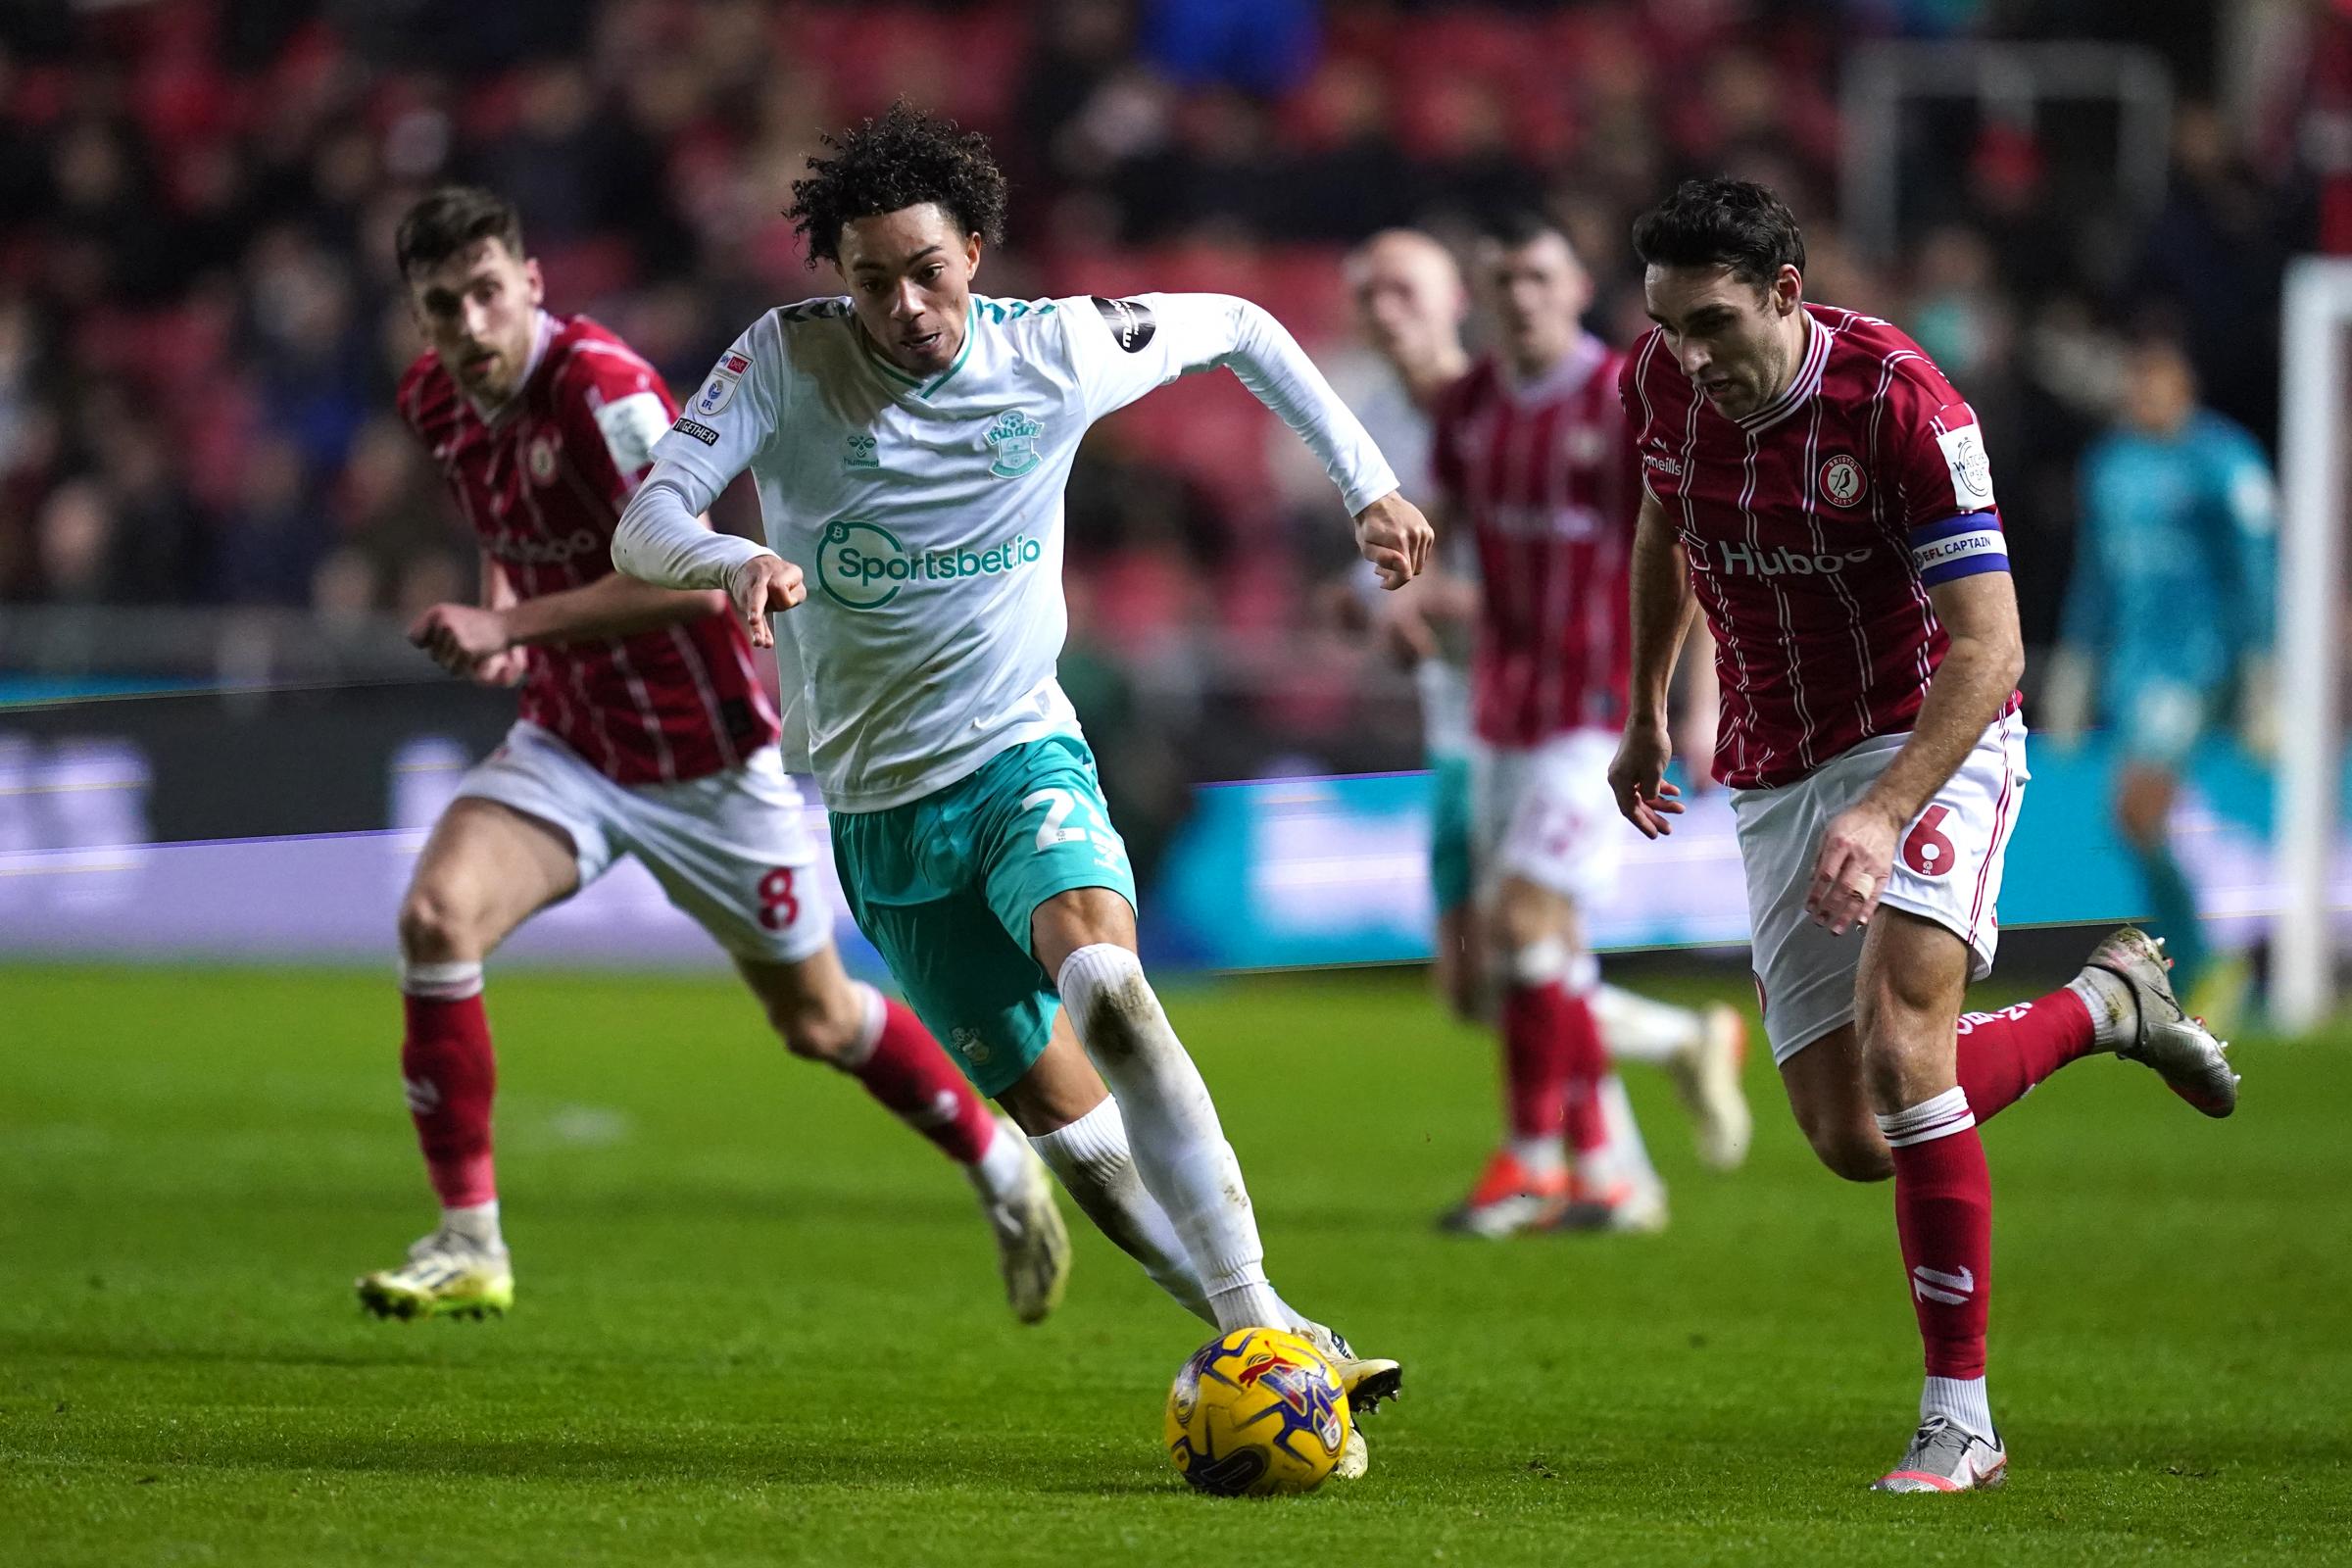 Southampton's Sam Edozie on his return from injury and 'bouncing back'